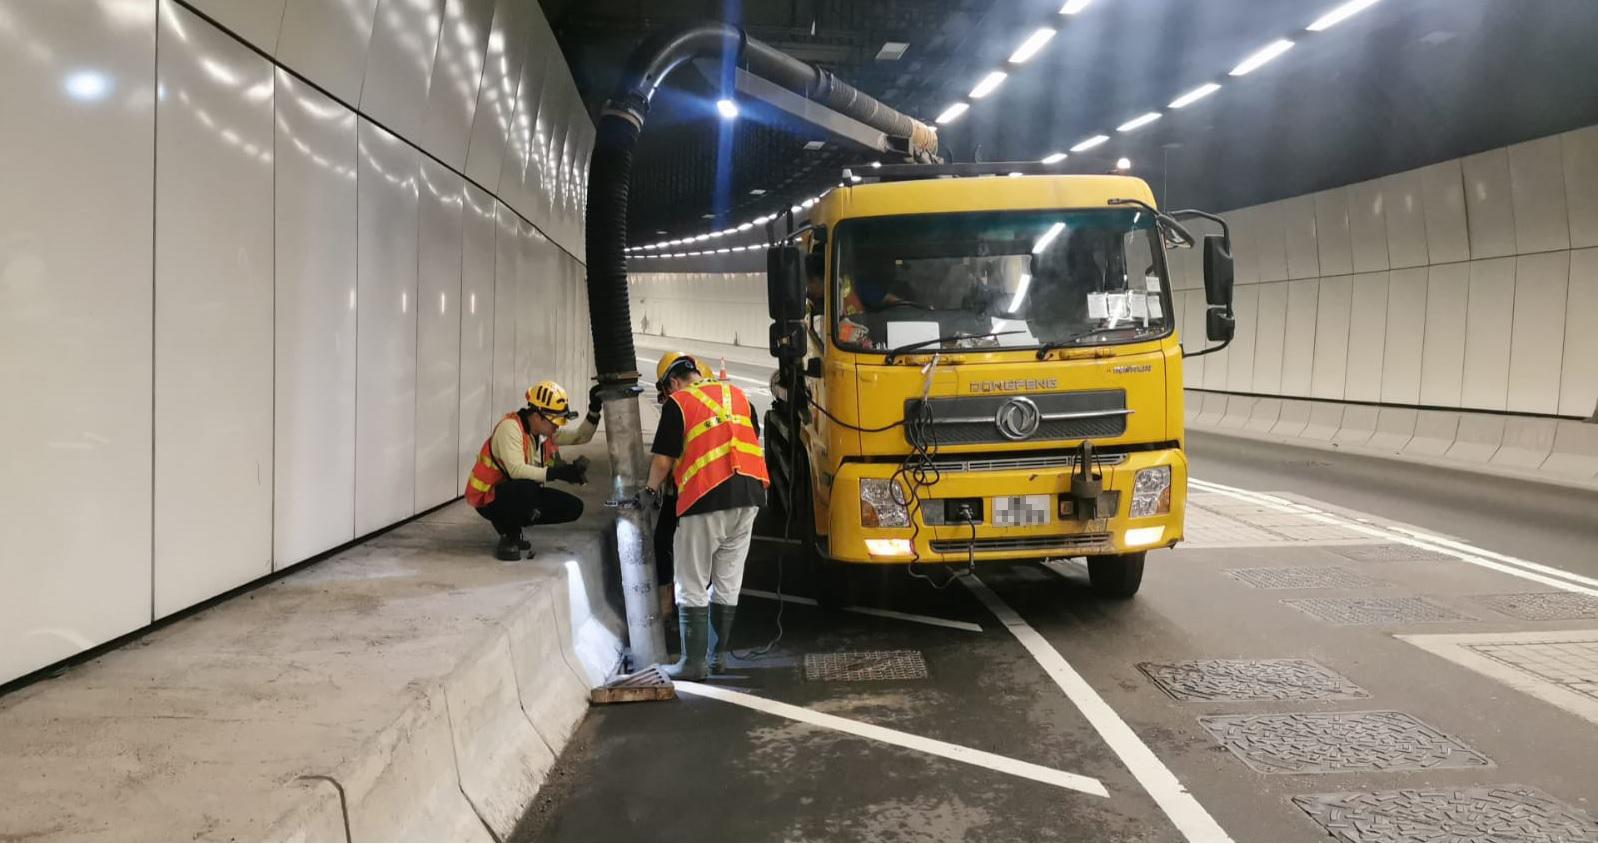 The Emergency Control Centres of the Highways Department today (March 17) conducted a drill to enhance the capability to cope with inclement weather. Photo shows staff members of a contractor clearing storm water drains inside a temporarily closed road tunnel before the drill to ensure they are free from blockage.